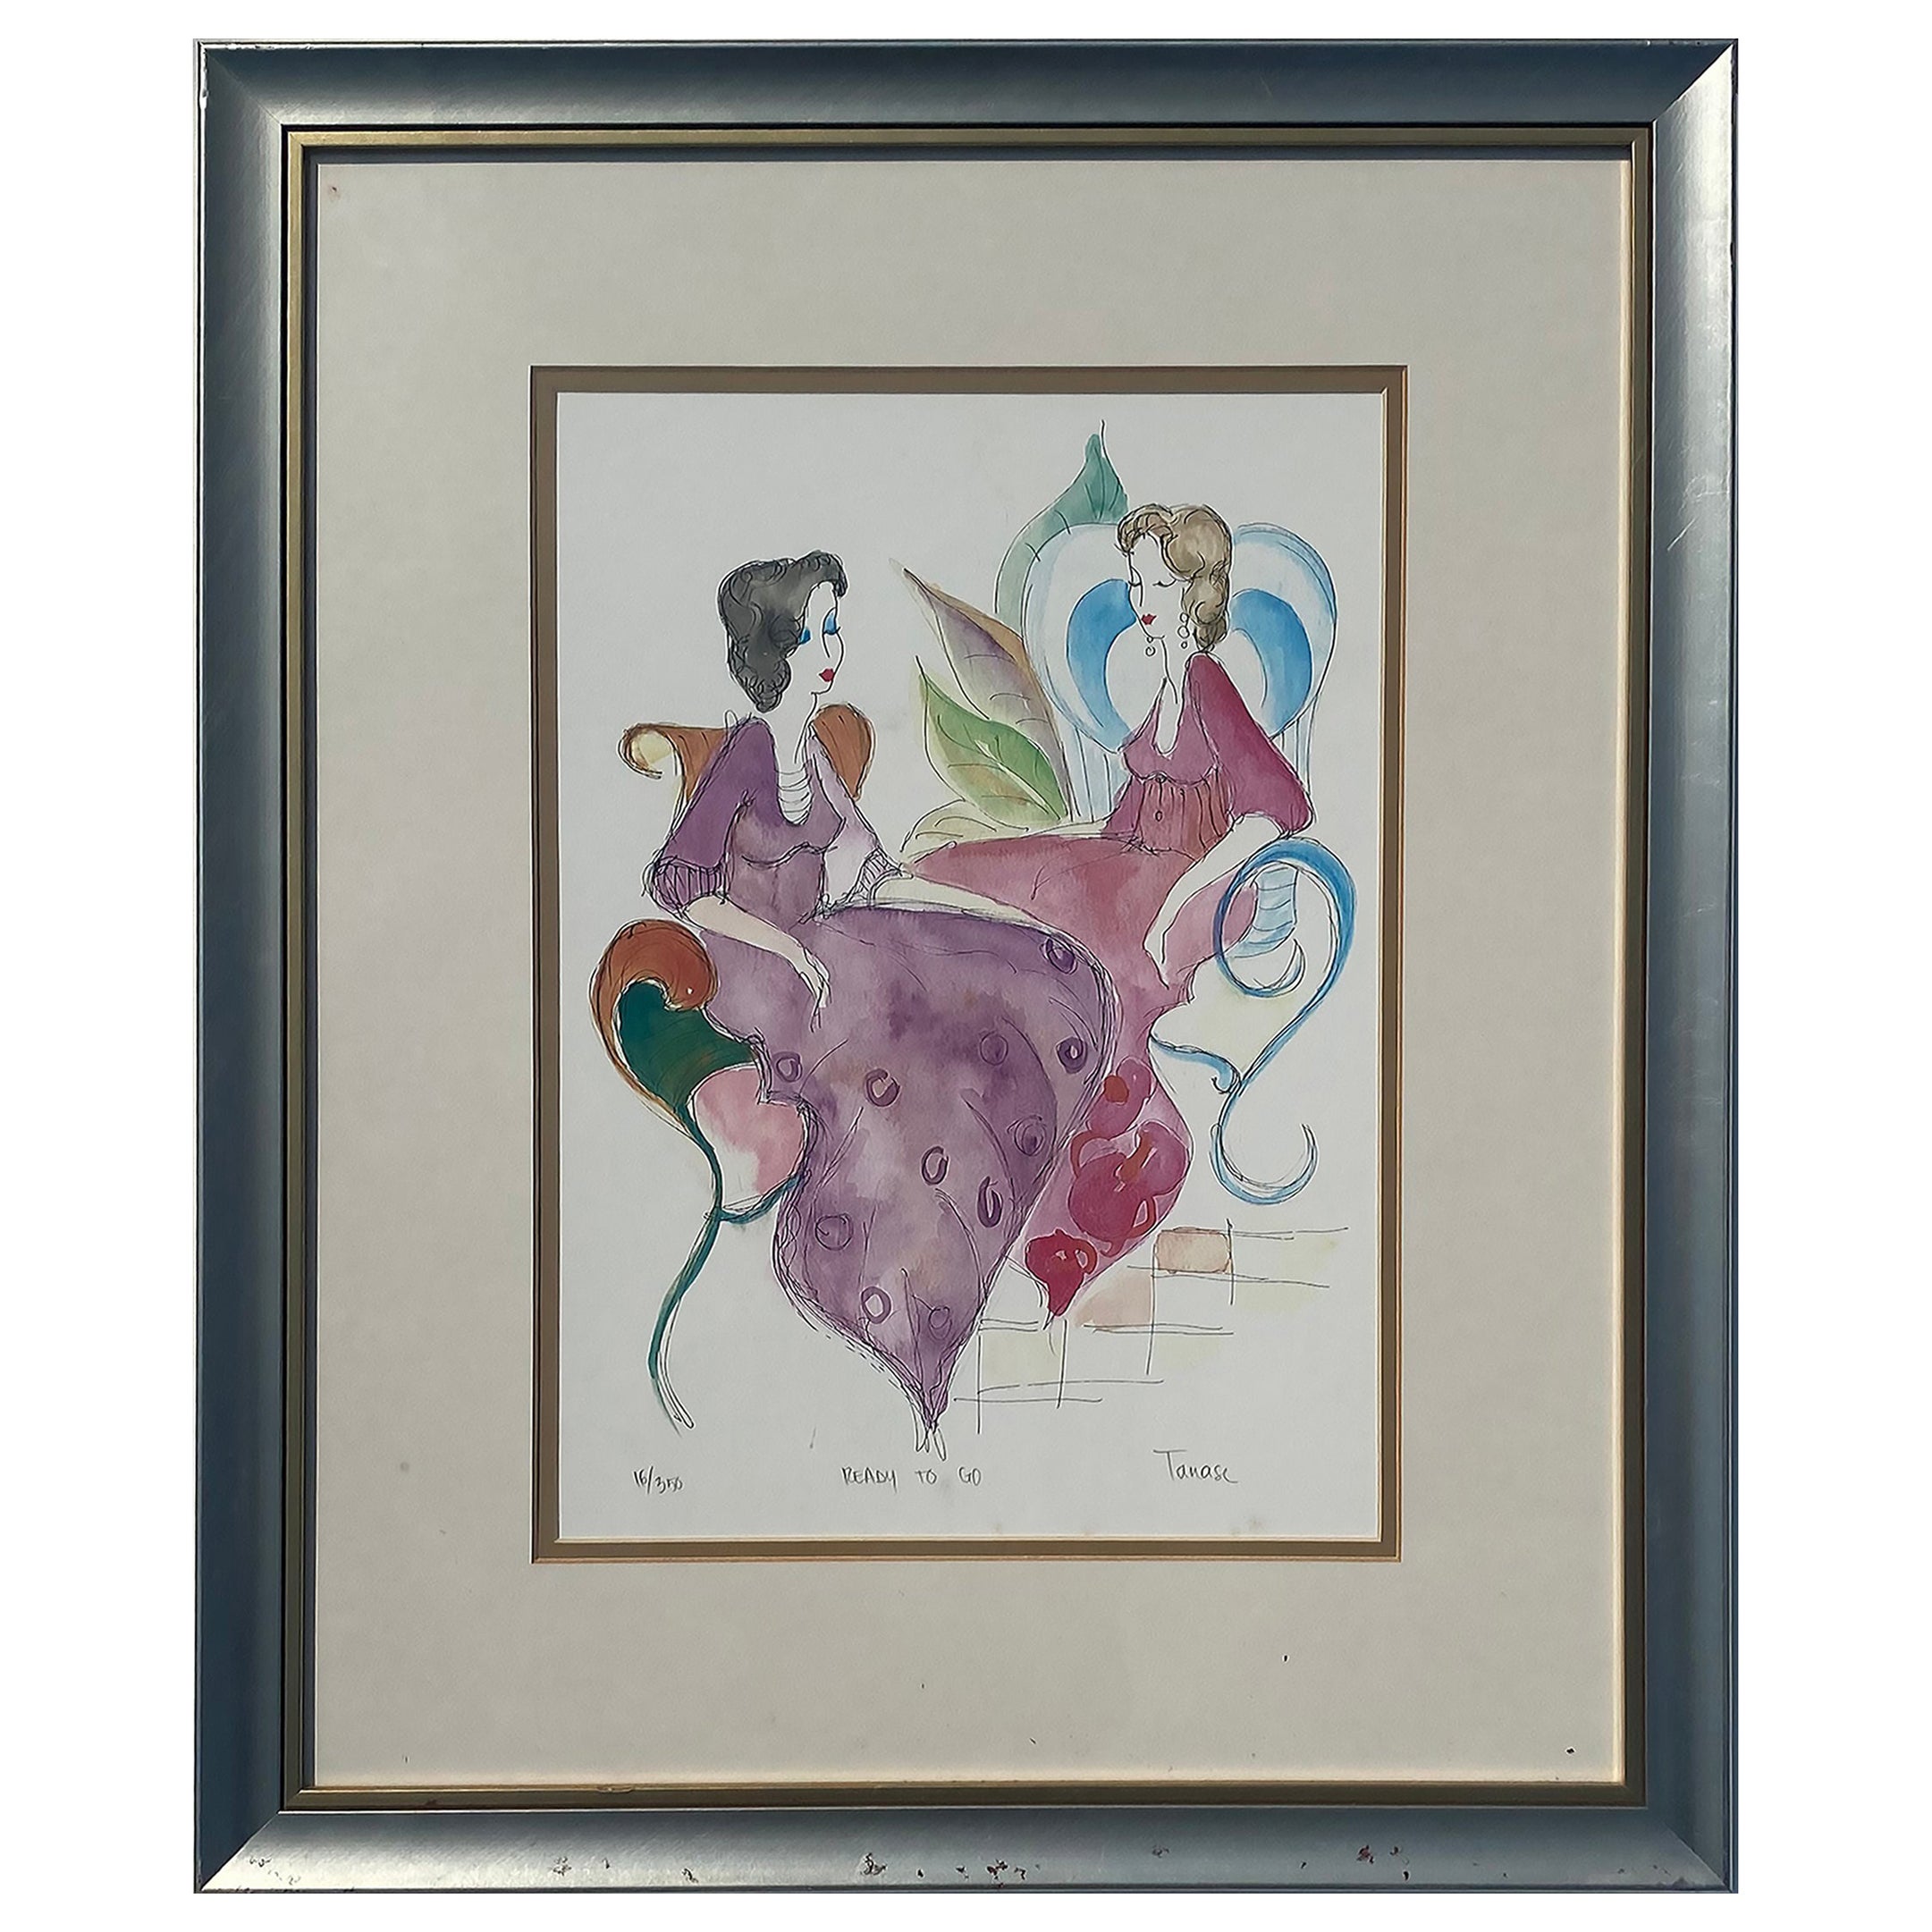 "Ready to Go" Framed Color Lithograph by Tanase, Pencil Signed & Numbered 16/350 For Sale